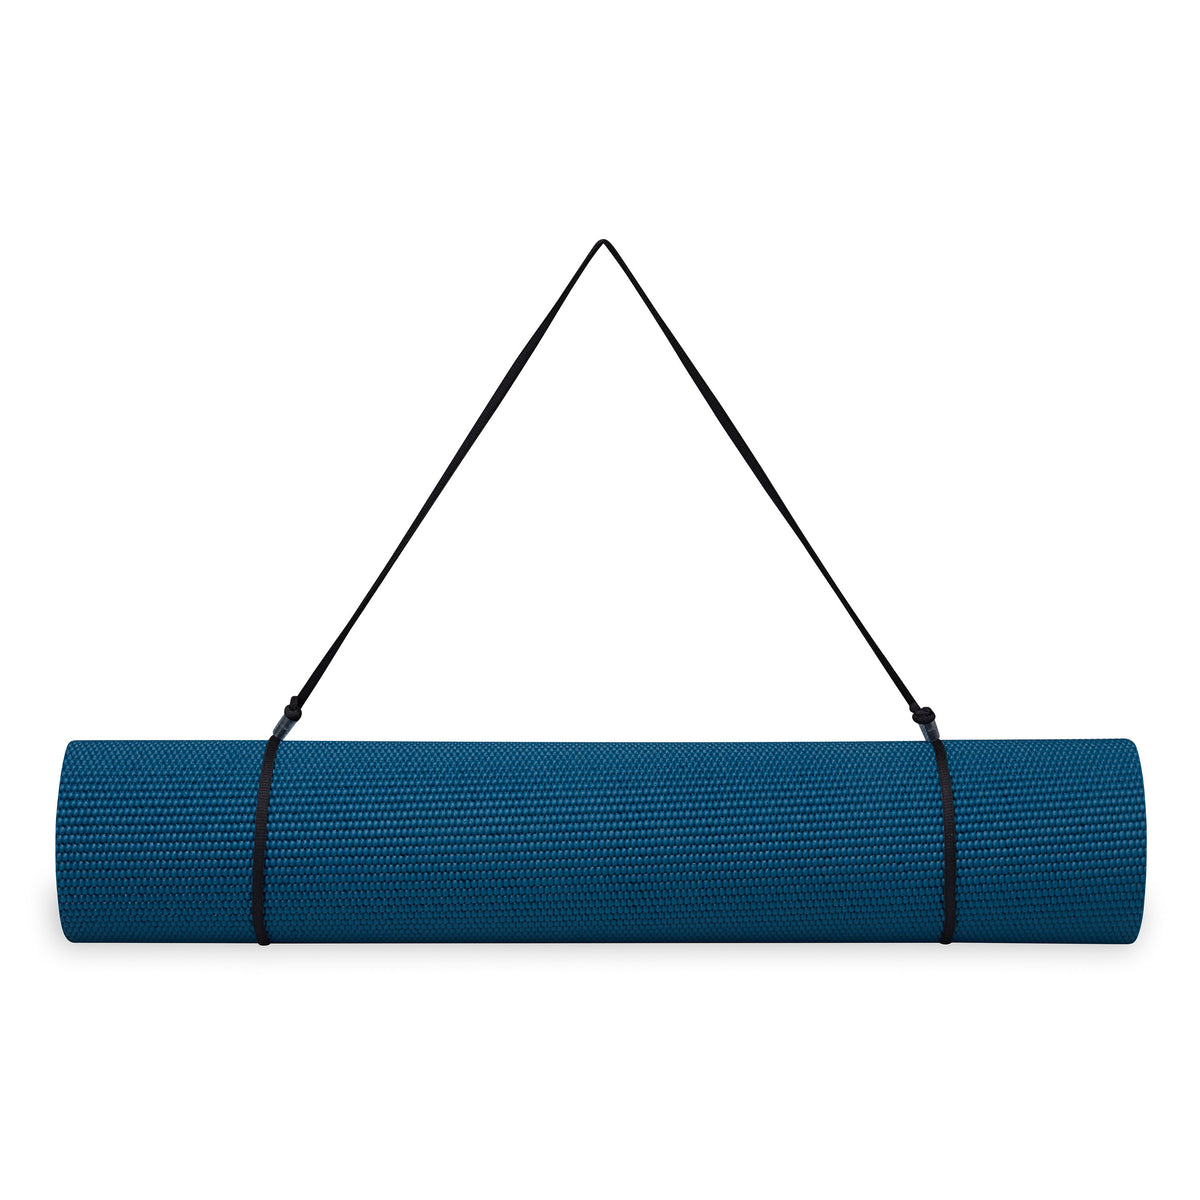 Gaiam 4mm Beginners Yoga Kit (Mat Block and Strap) Navy for sale online